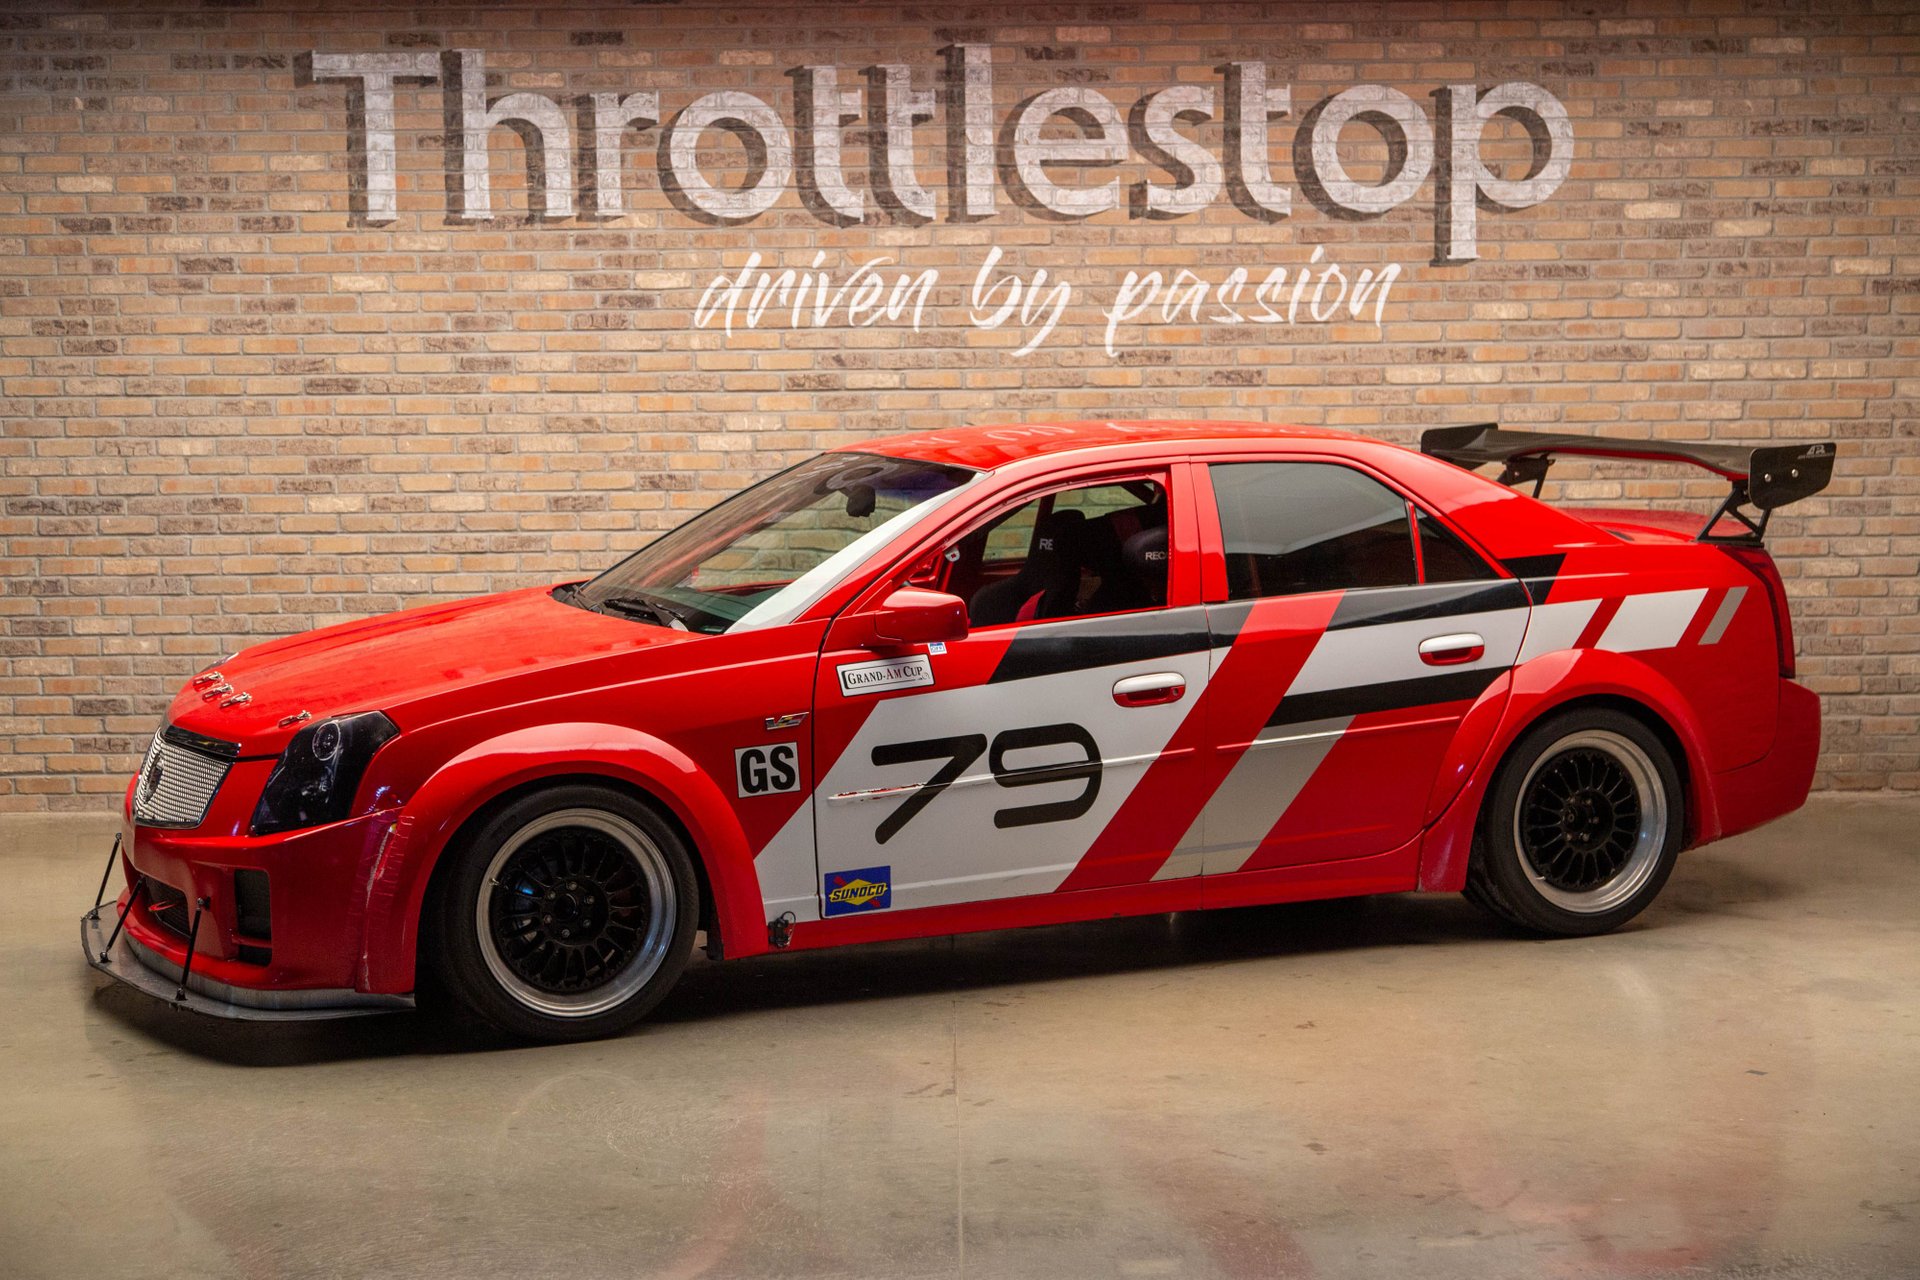 2005 Cadillac CTS-V | Throttlestop | Consignment Dealer & Motorcycle Museum